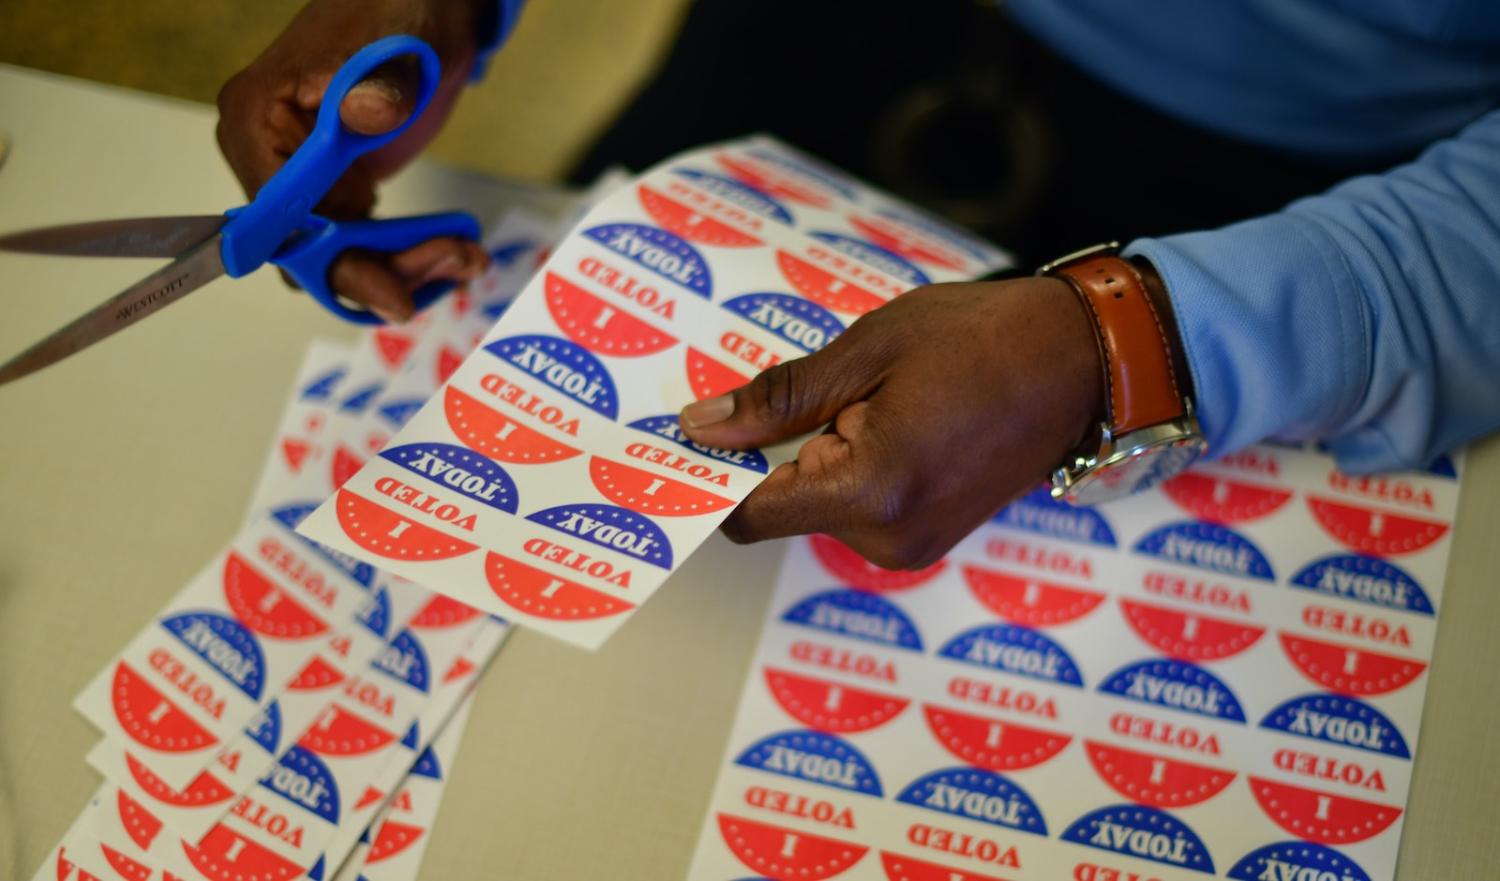 A volunteer cuts out stickers for voters at a polling station in Philadelphia, Pennsylvania, a key state in this year’s election (Mark Makela/Getty Images)